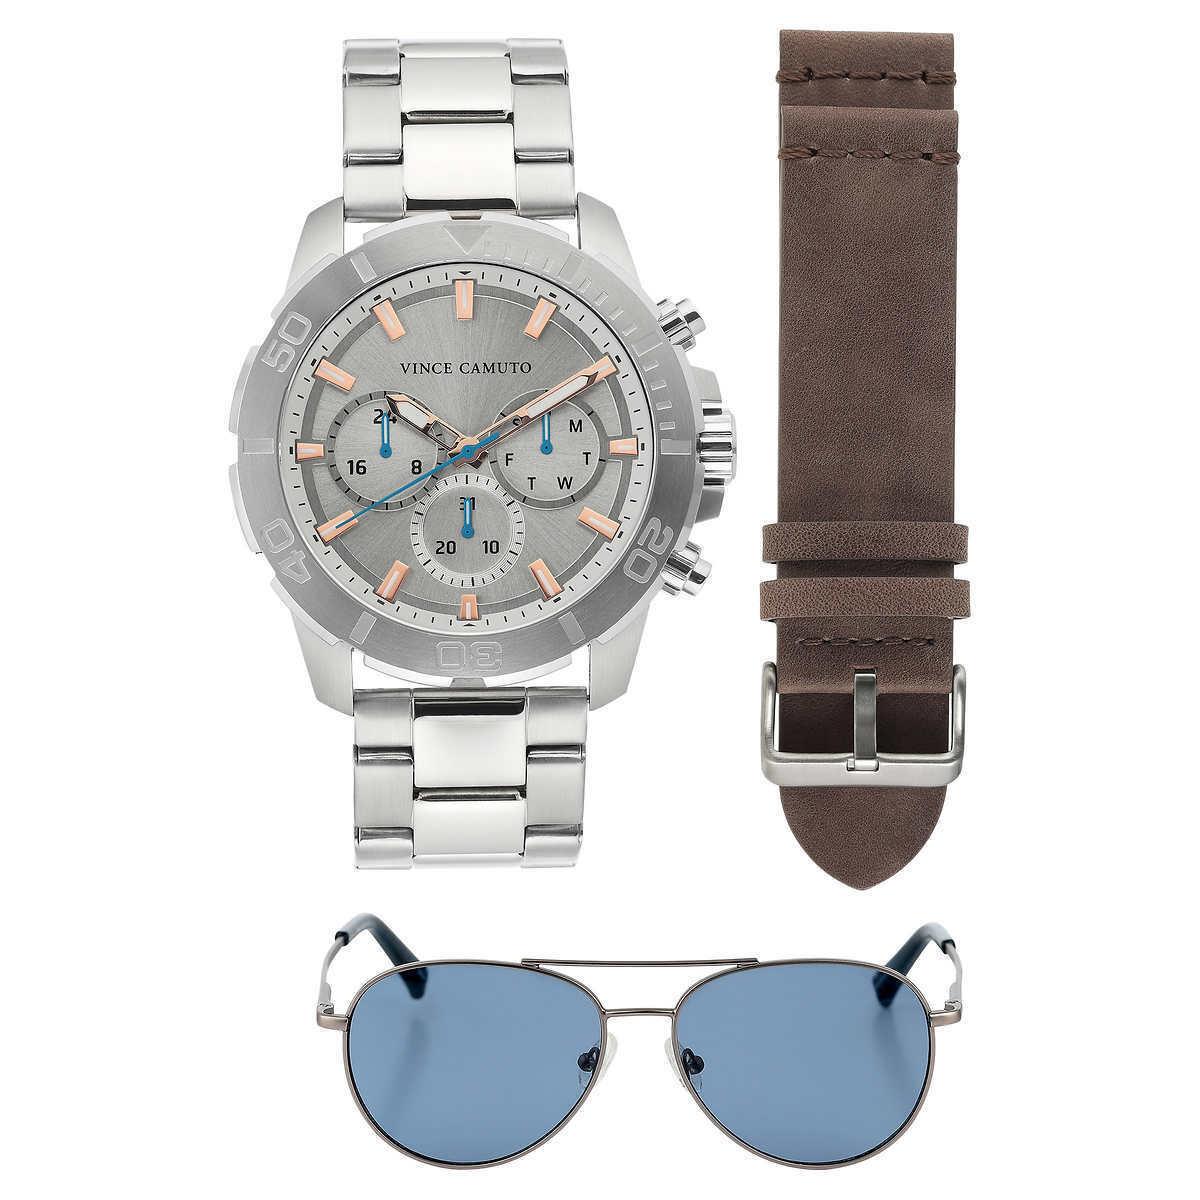 Vince Camuto Chronograph Stainless Steel Mens Watch and Sunglass Set B19 3291 - Green Face, Green Dial, Gold Band